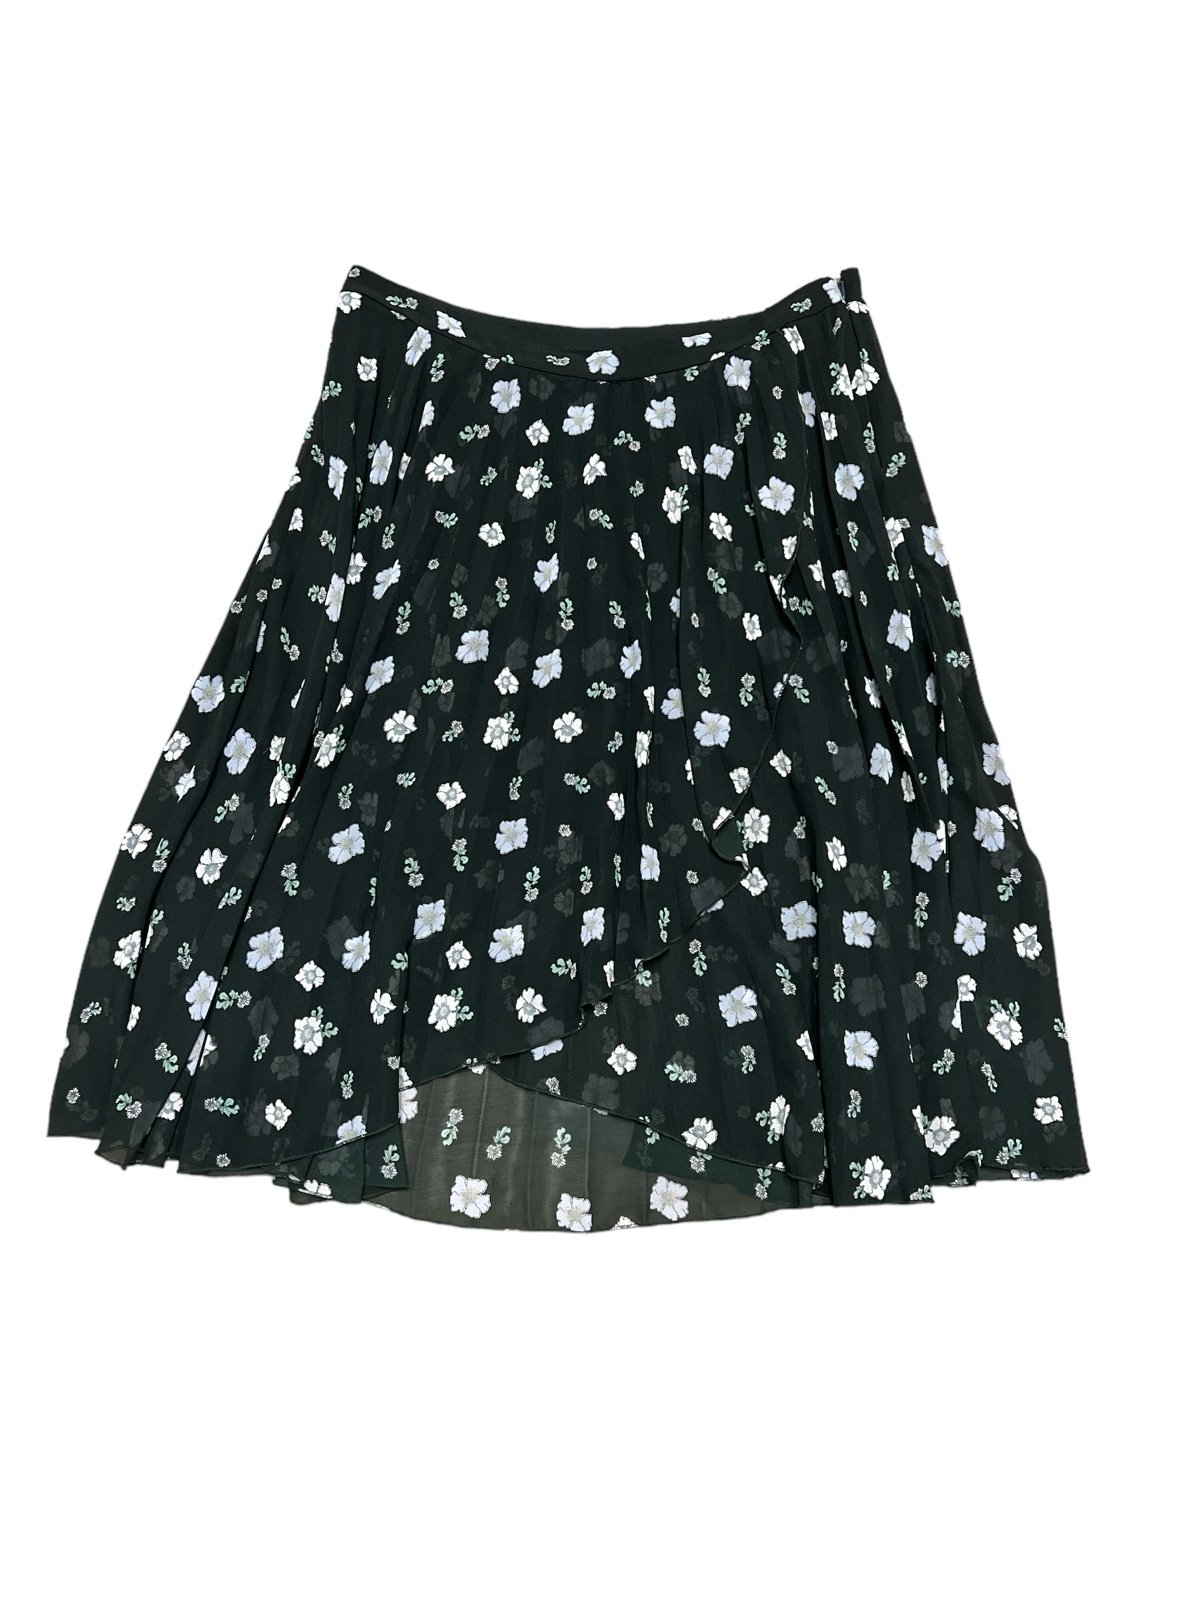 Simple Women’s floral asos midi skirt HHIc7jXH6 US Outl